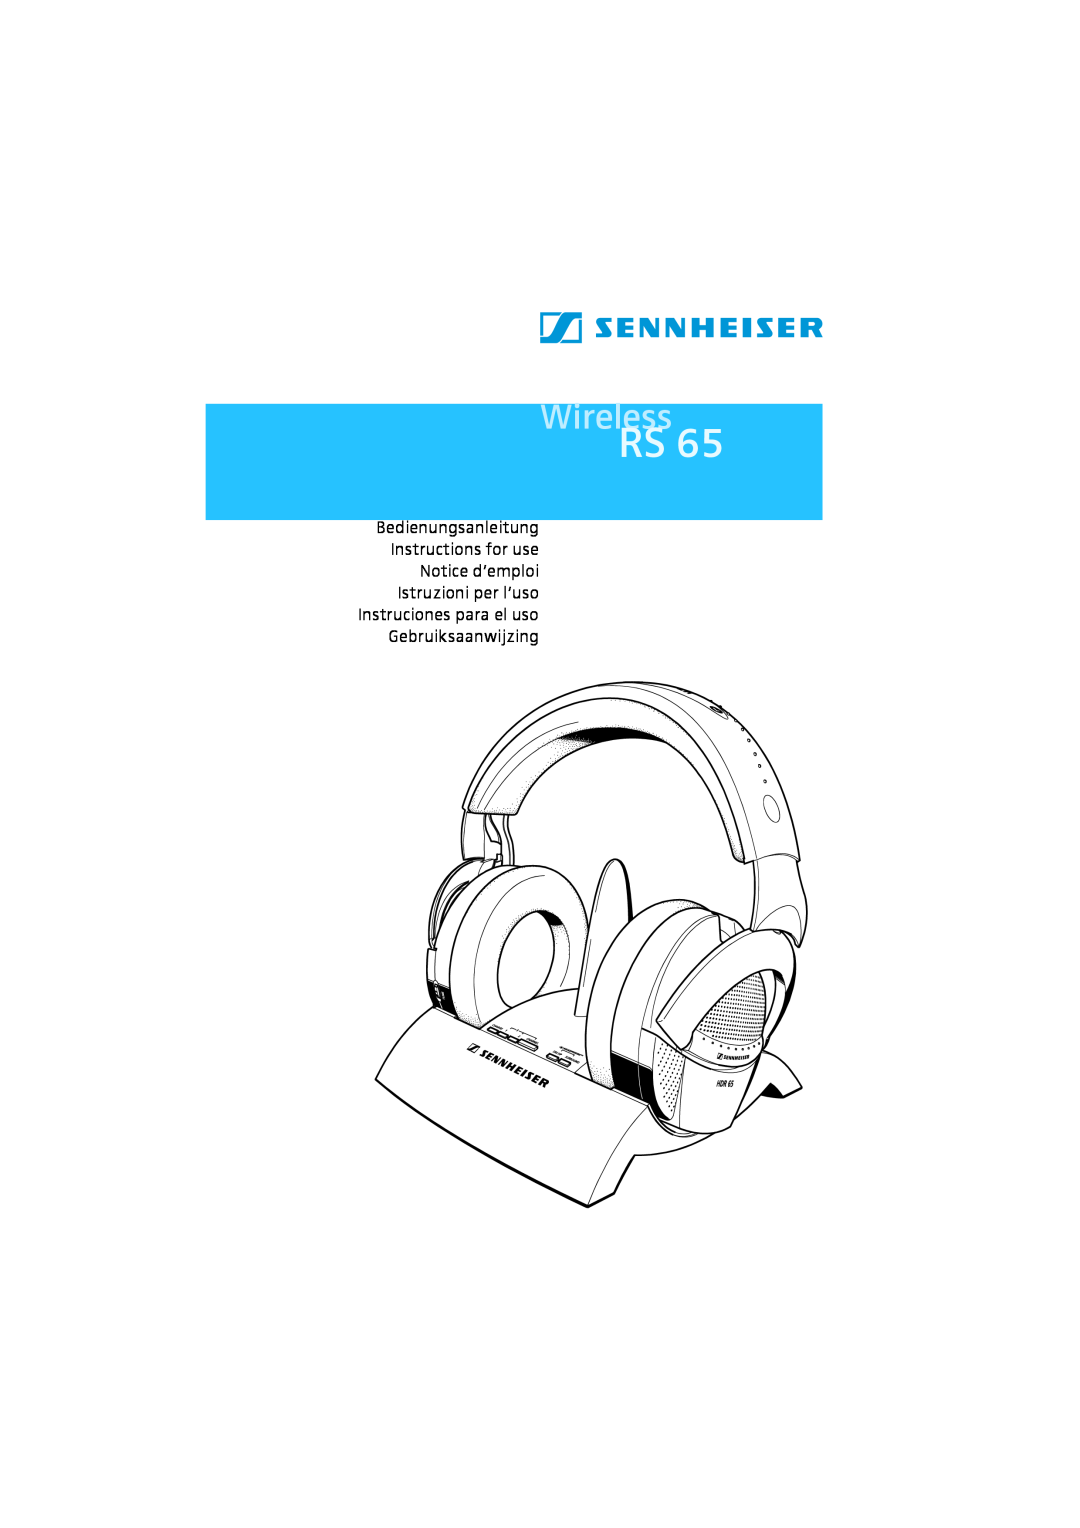 Sennheiser RS 65 manual Bedienungsanleitung Instructions for use, Notice d’emploi Istruzioni per l’uso, Wireless 